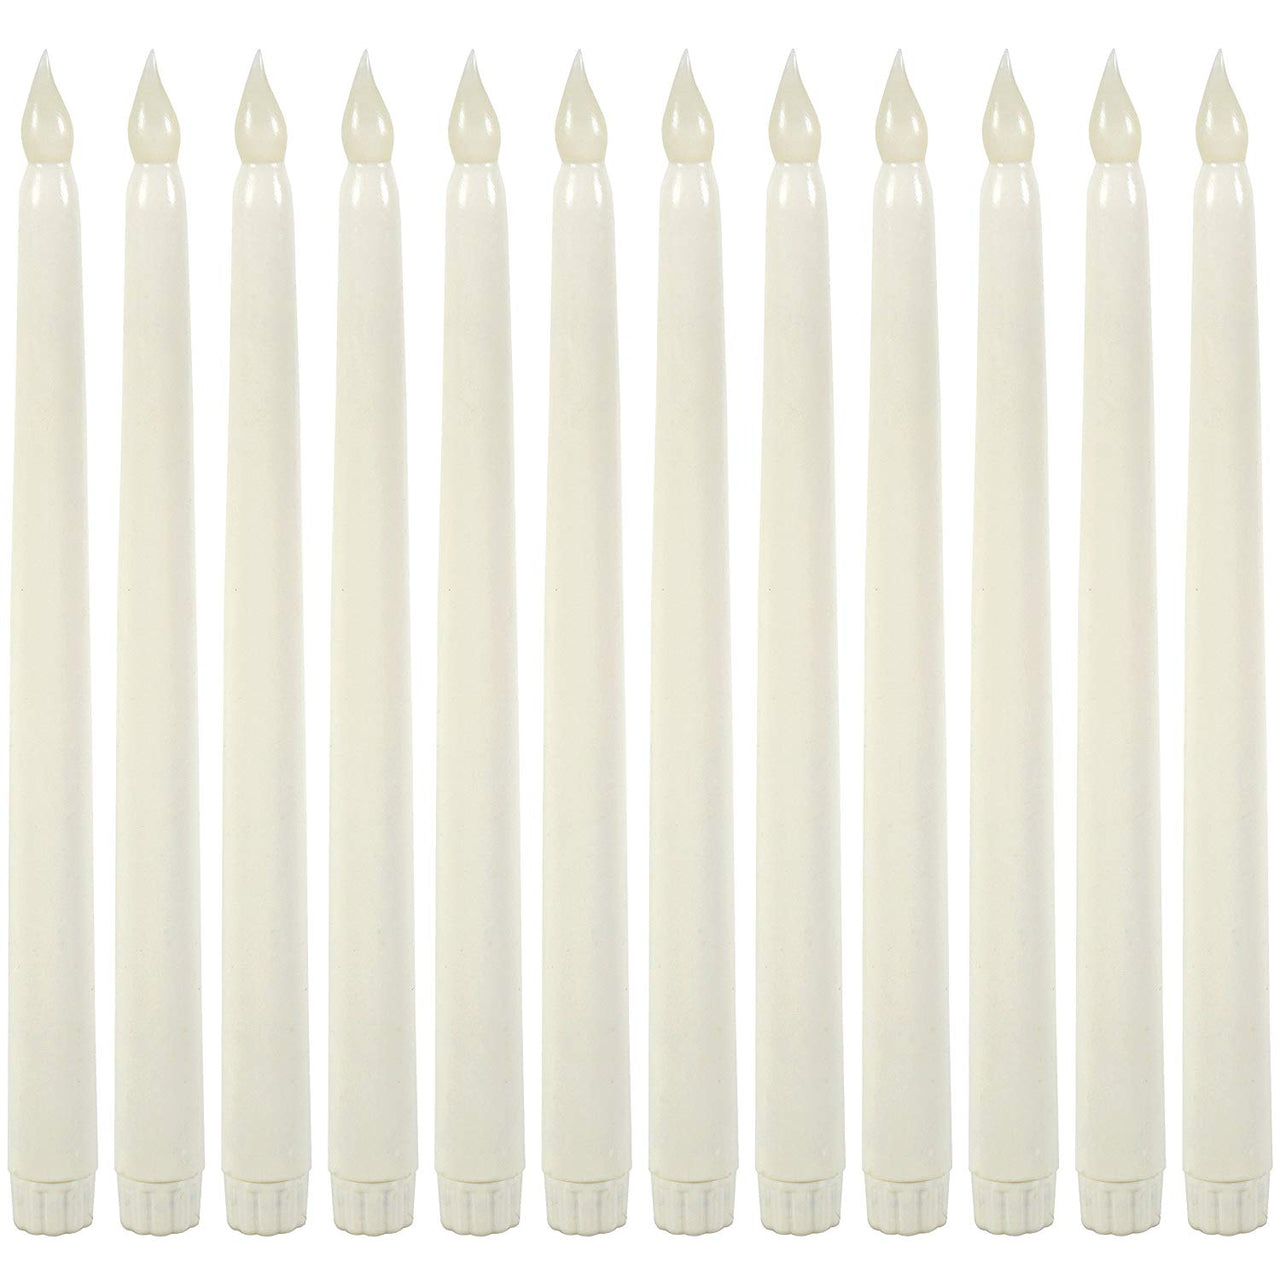 11" Ivory Taper Flameless LED Faux Wax Candle Lights 12 Pack - West Ivory LED Lighting 